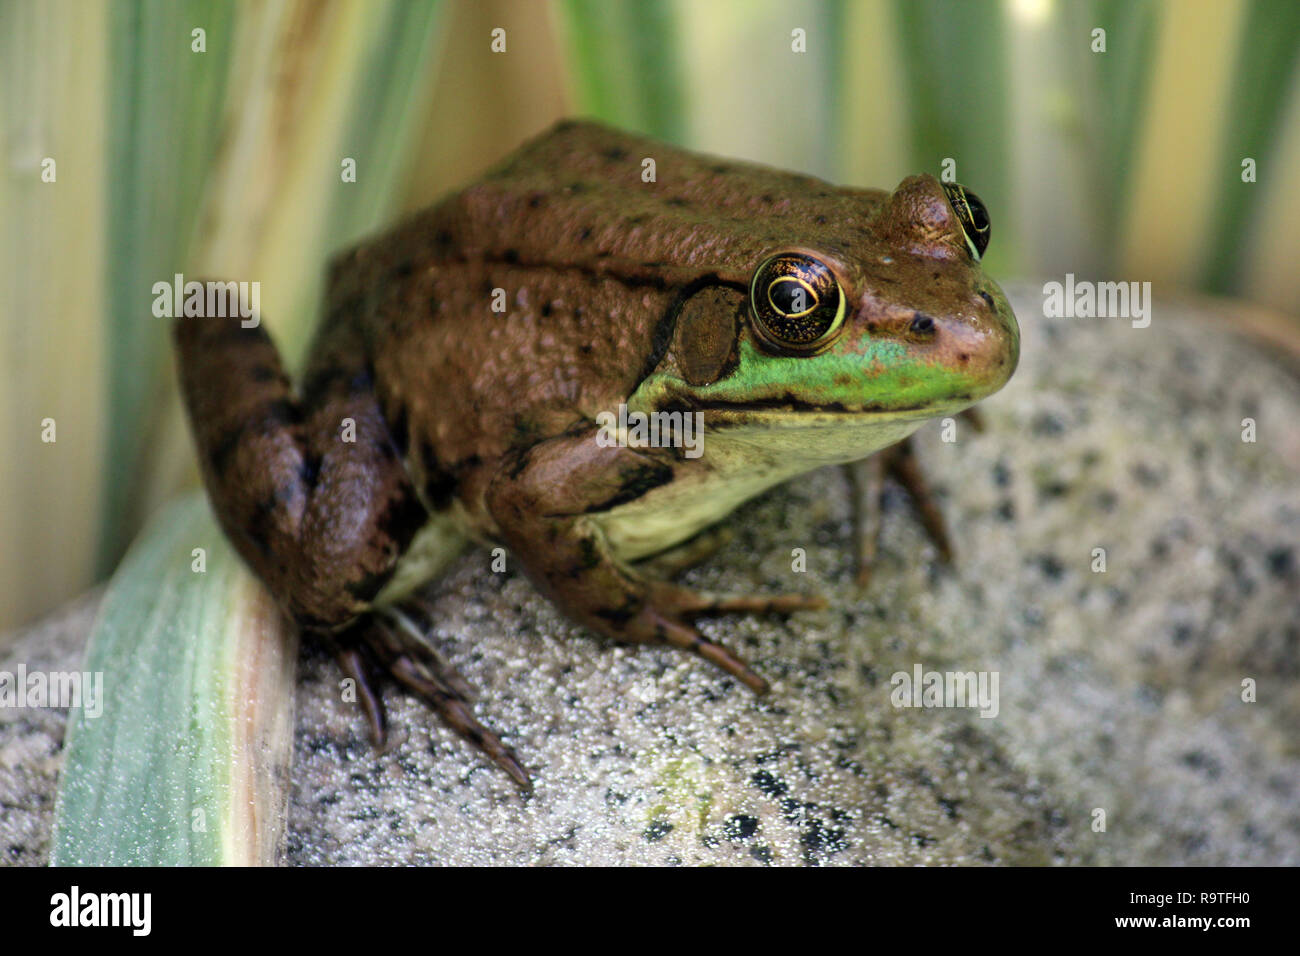 Close up of an American Bullfrog, Lithobates catesbeianus, sitting on a rock using a bokeh effect Stock Photo